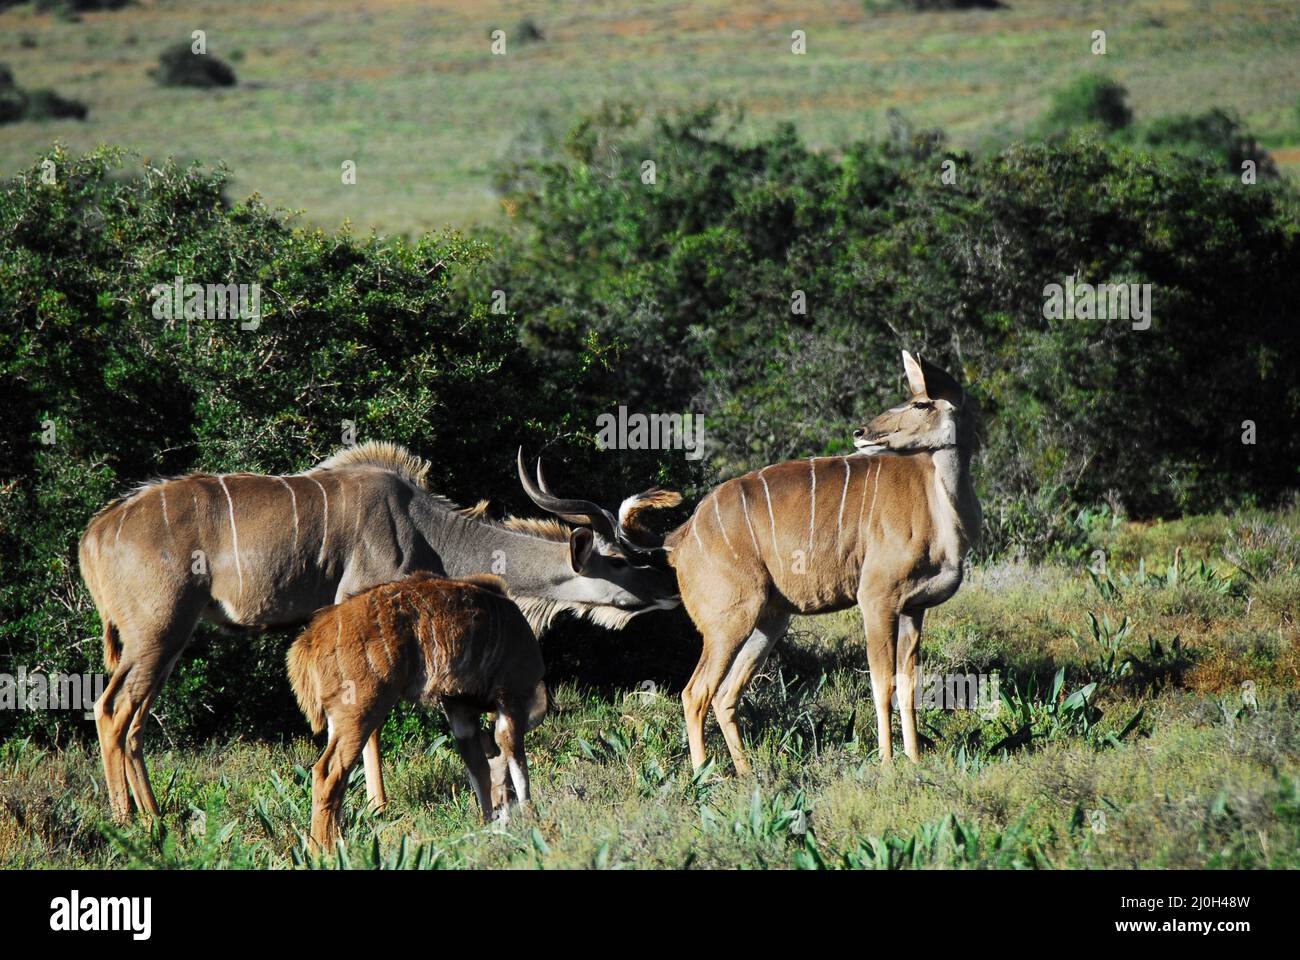 A wonderful close up view of mating behavior.  A bull Kudu is sniffing a female's perineal area to determine if she is ready to mate. Stock Photo